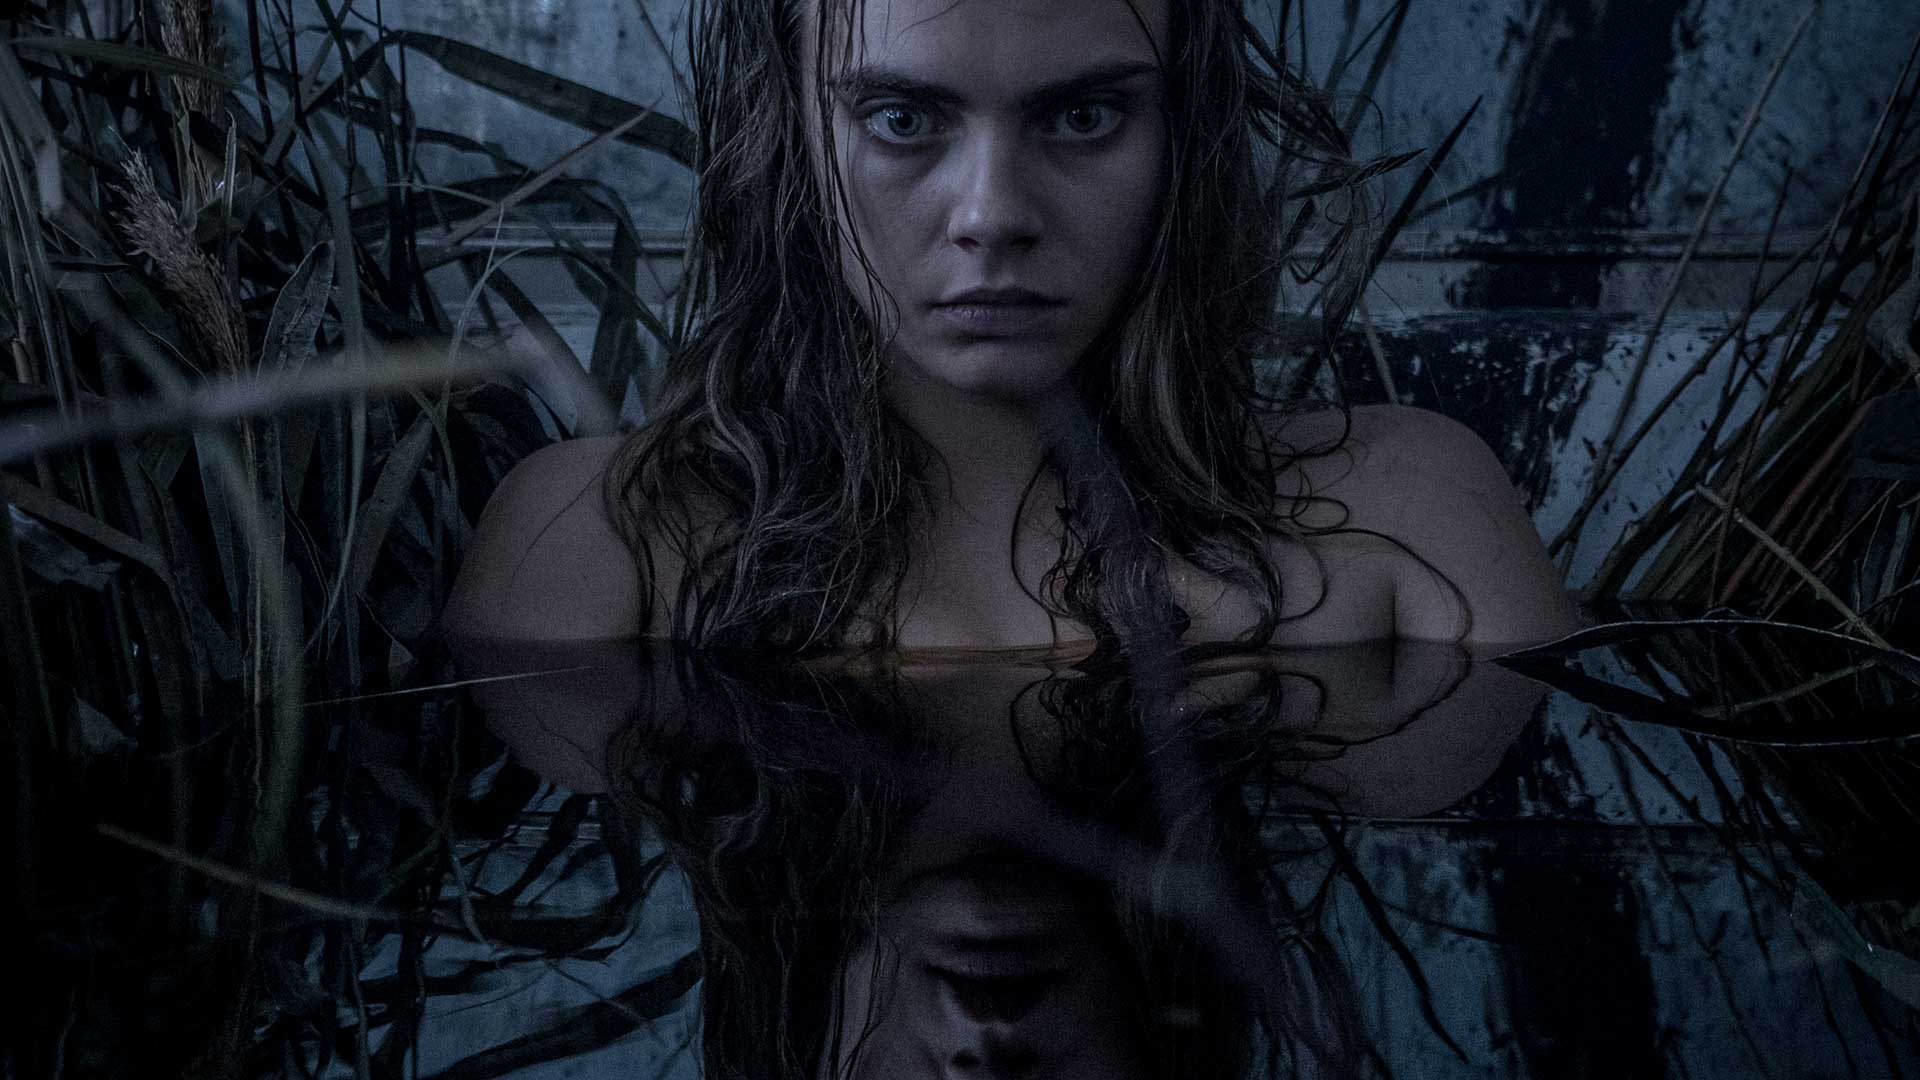 Fans have already seen Enchantress bathing in a swamp but that new headpiece is quite something